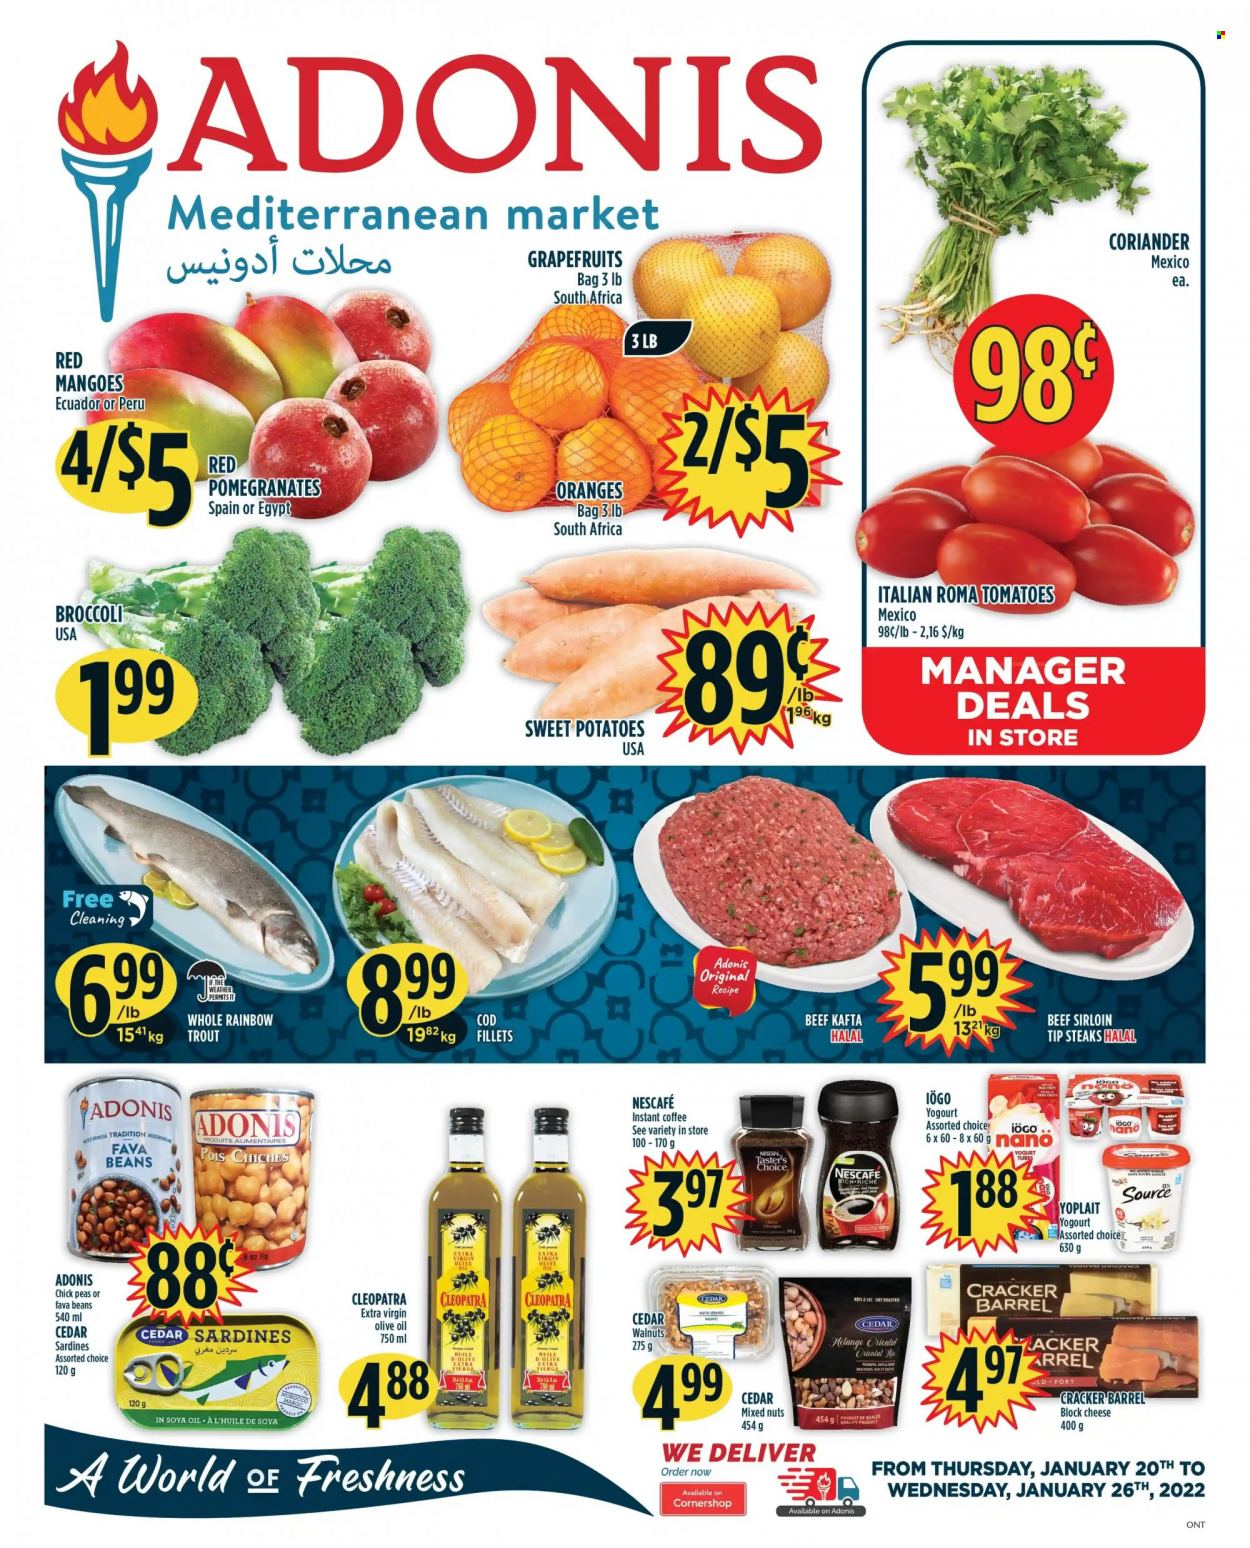 thumbnail - Adonis Flyer - January 20, 2022 - January 26, 2022 - Sales products - broccoli, fava beans, sweet potato, tomatoes, potatoes, grapefruits, mango, pomegranate, cod, sardines, trout, cheese, yoghurt, Yoplait, crackers, coriander, extra virgin olive oil, soya oil, olive oil, oil, walnuts, peanuts, mixed nuts, instant coffee, beef meat, beef sirloin, steak, Nescafé, oranges. Page 1.